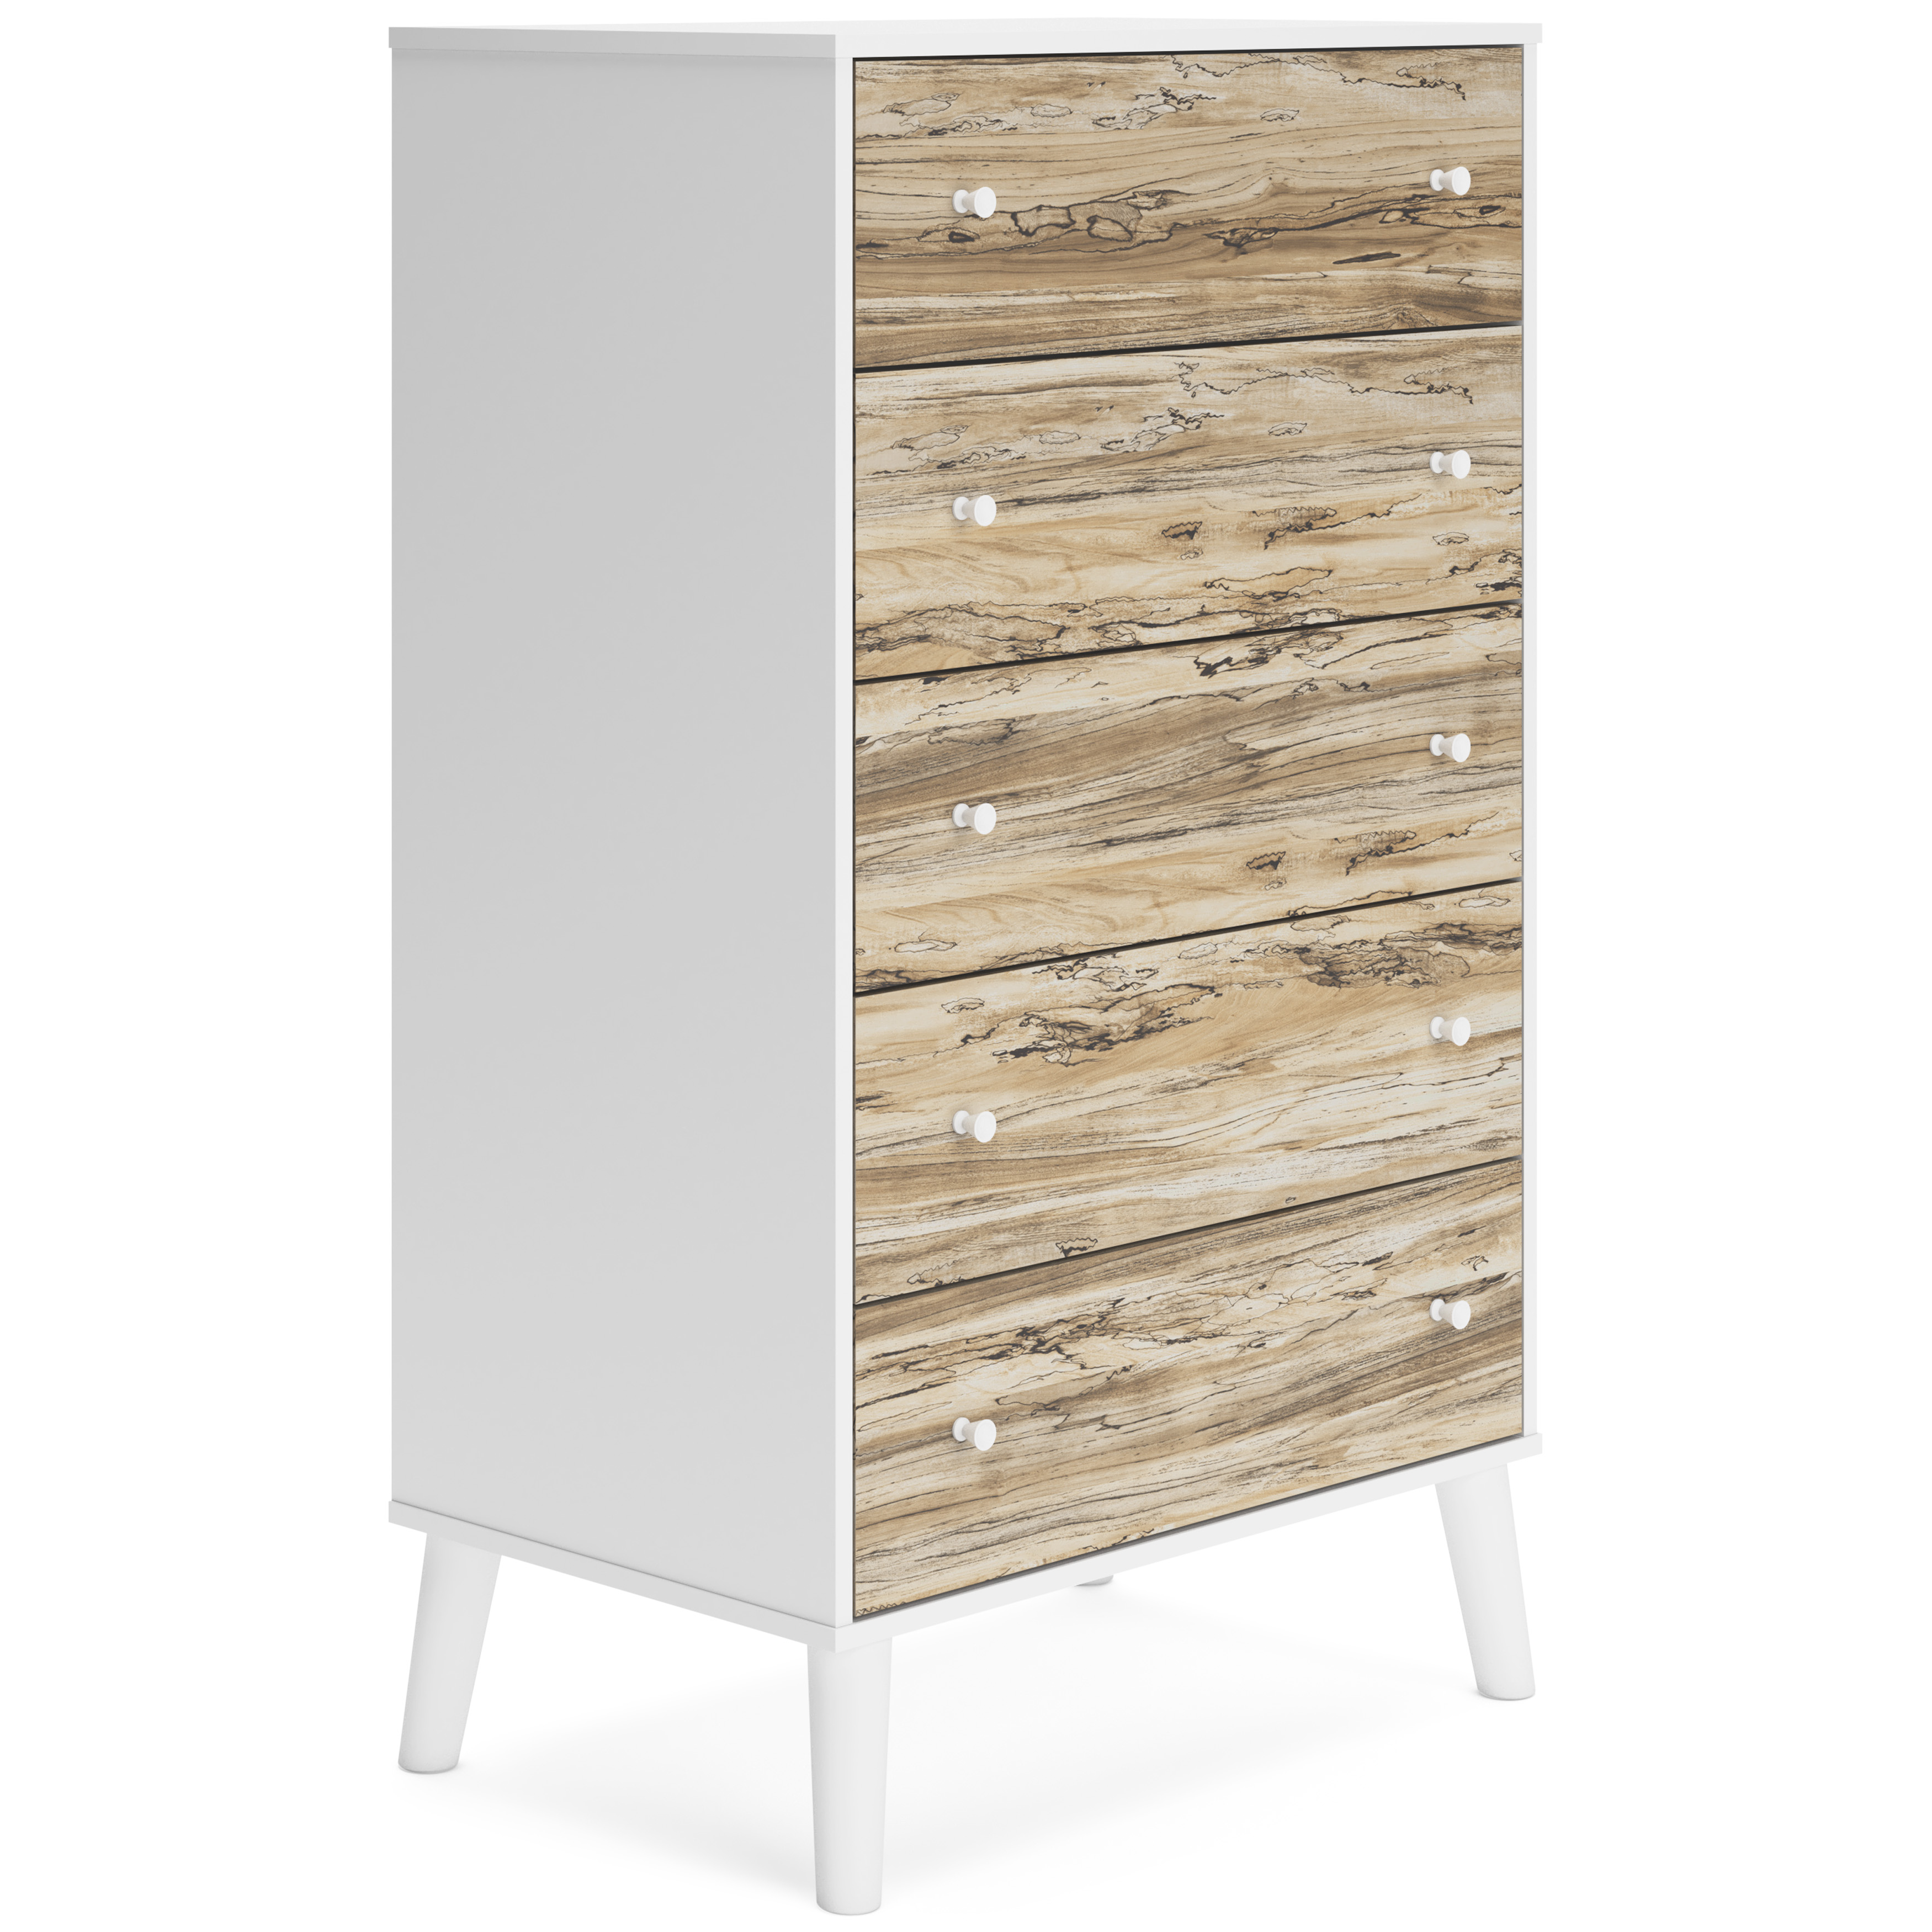 Signature Design by Ashley Piperton Five Drawer Chest EB1221-245 Two-tone Brown/White